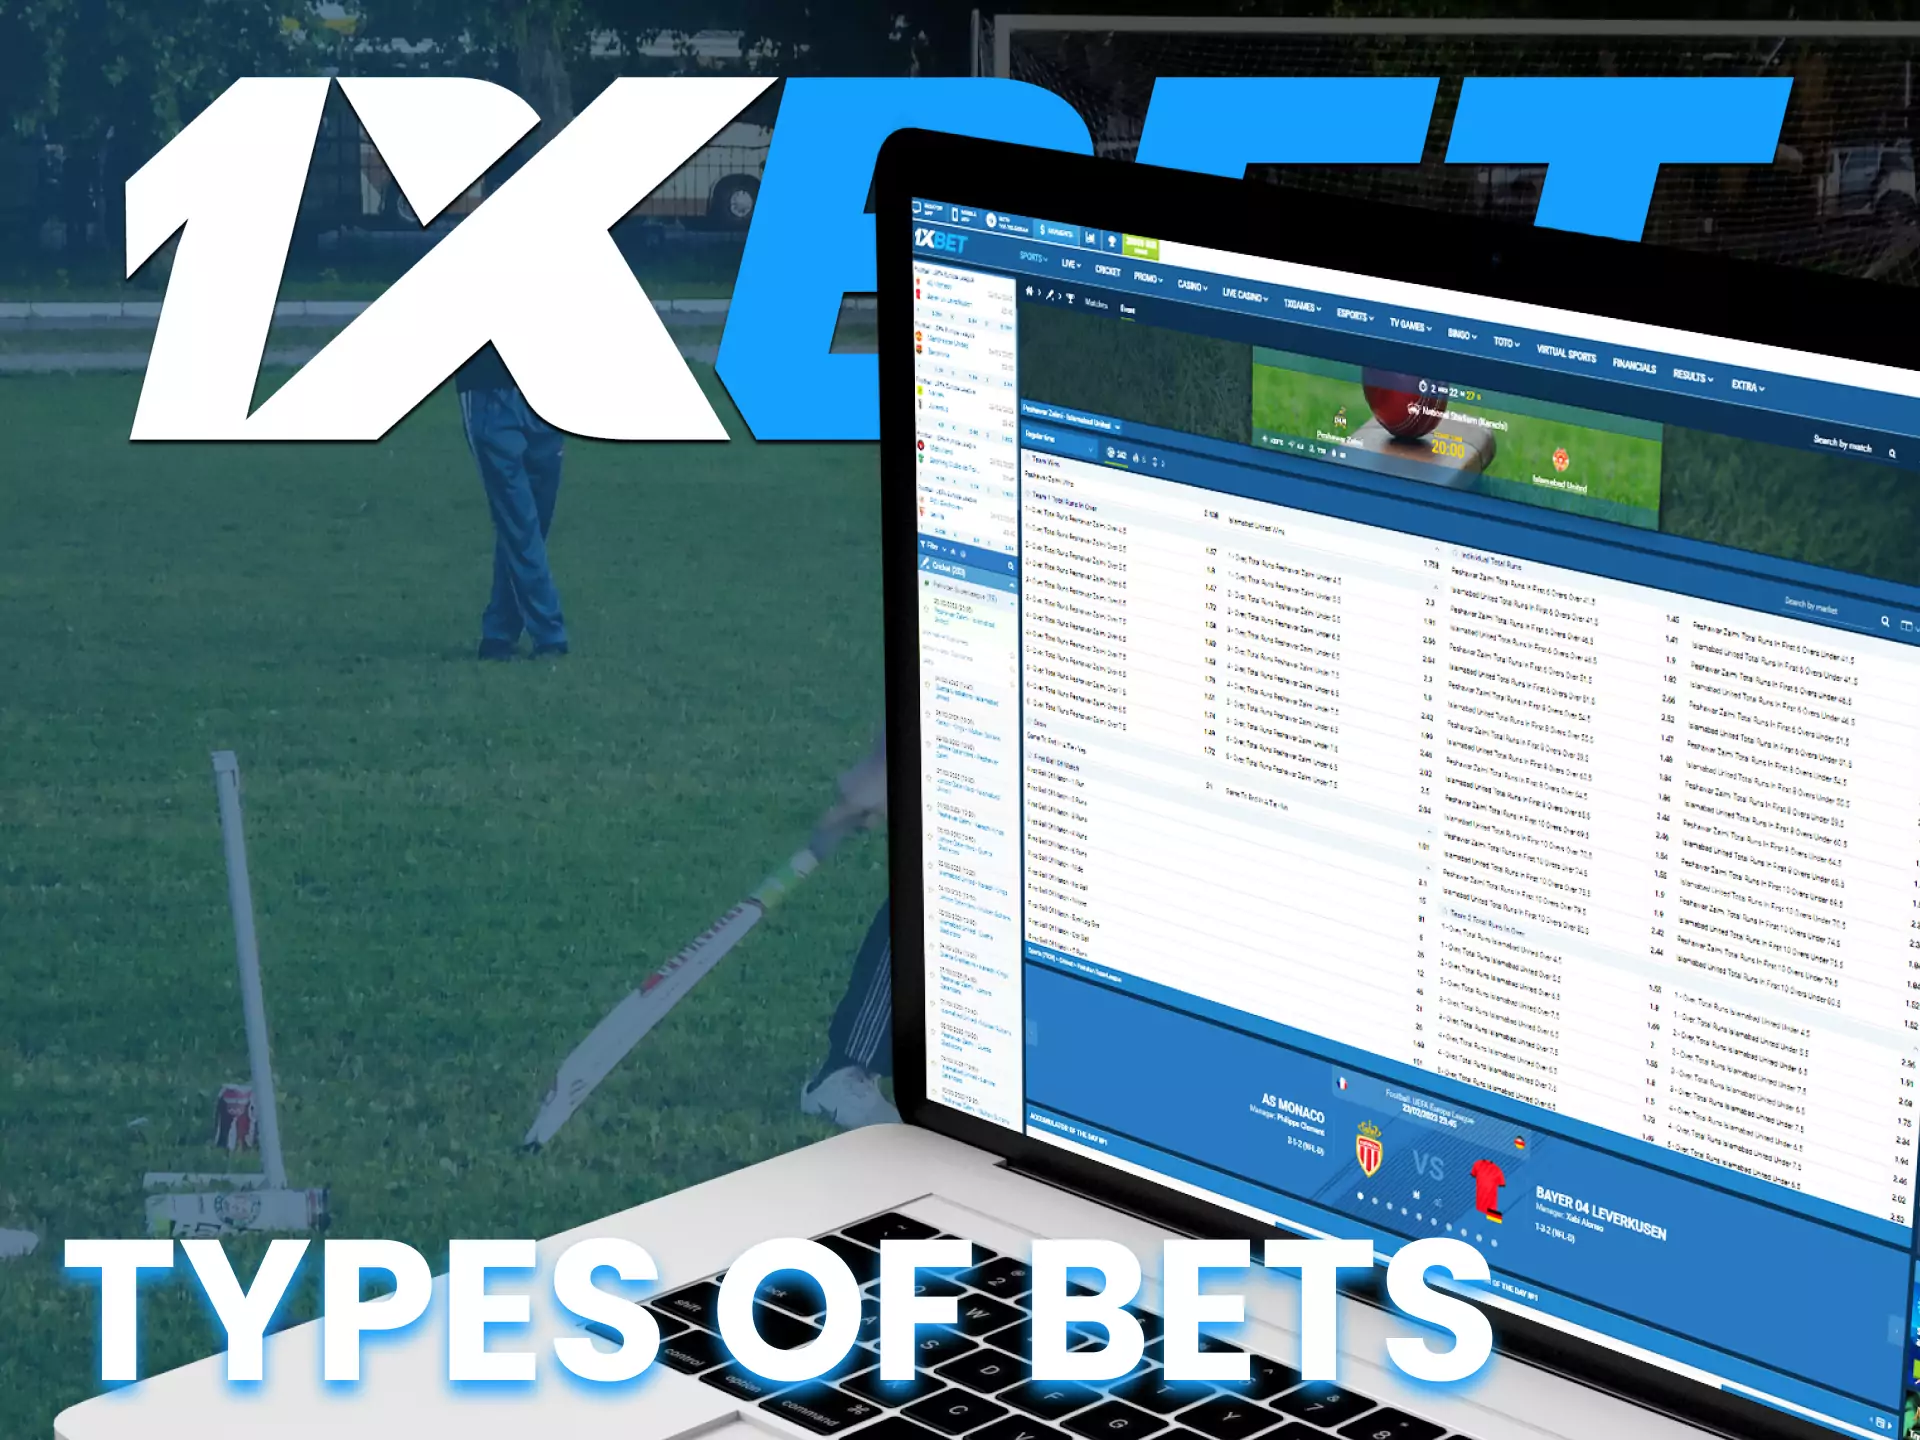 At 1XBET, try different types of bets.